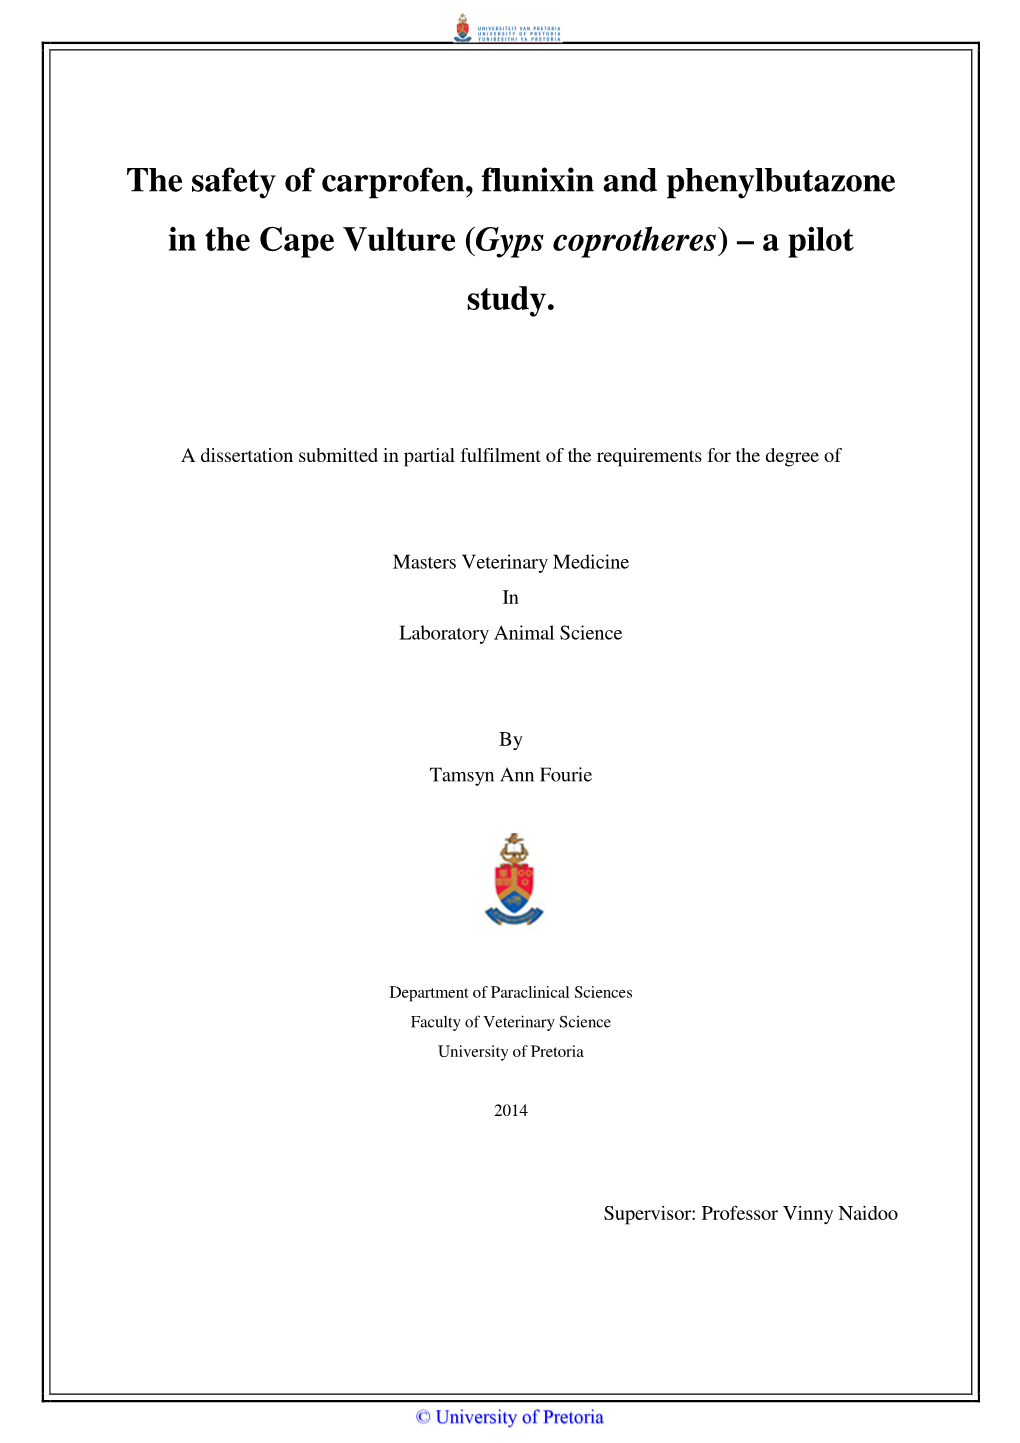 The Safety of Carprofen, Flunixin and Phenylbutazone in the Cape Vulture (Gyps Coprotheres ) – a Pilot Study